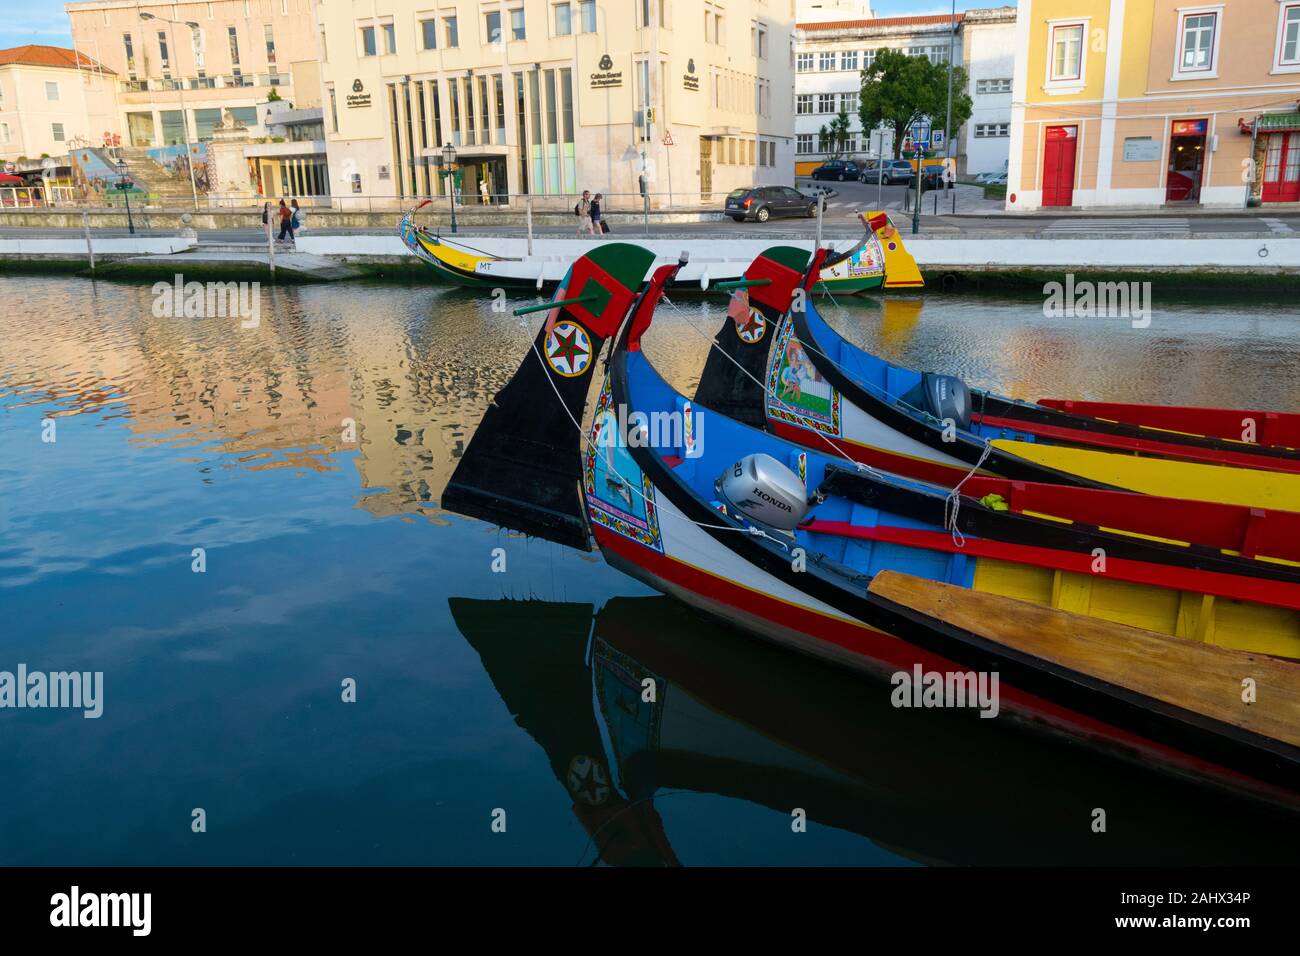 Moliceiro boats moored on the central canal in Aveiro Portugal Stock Photo